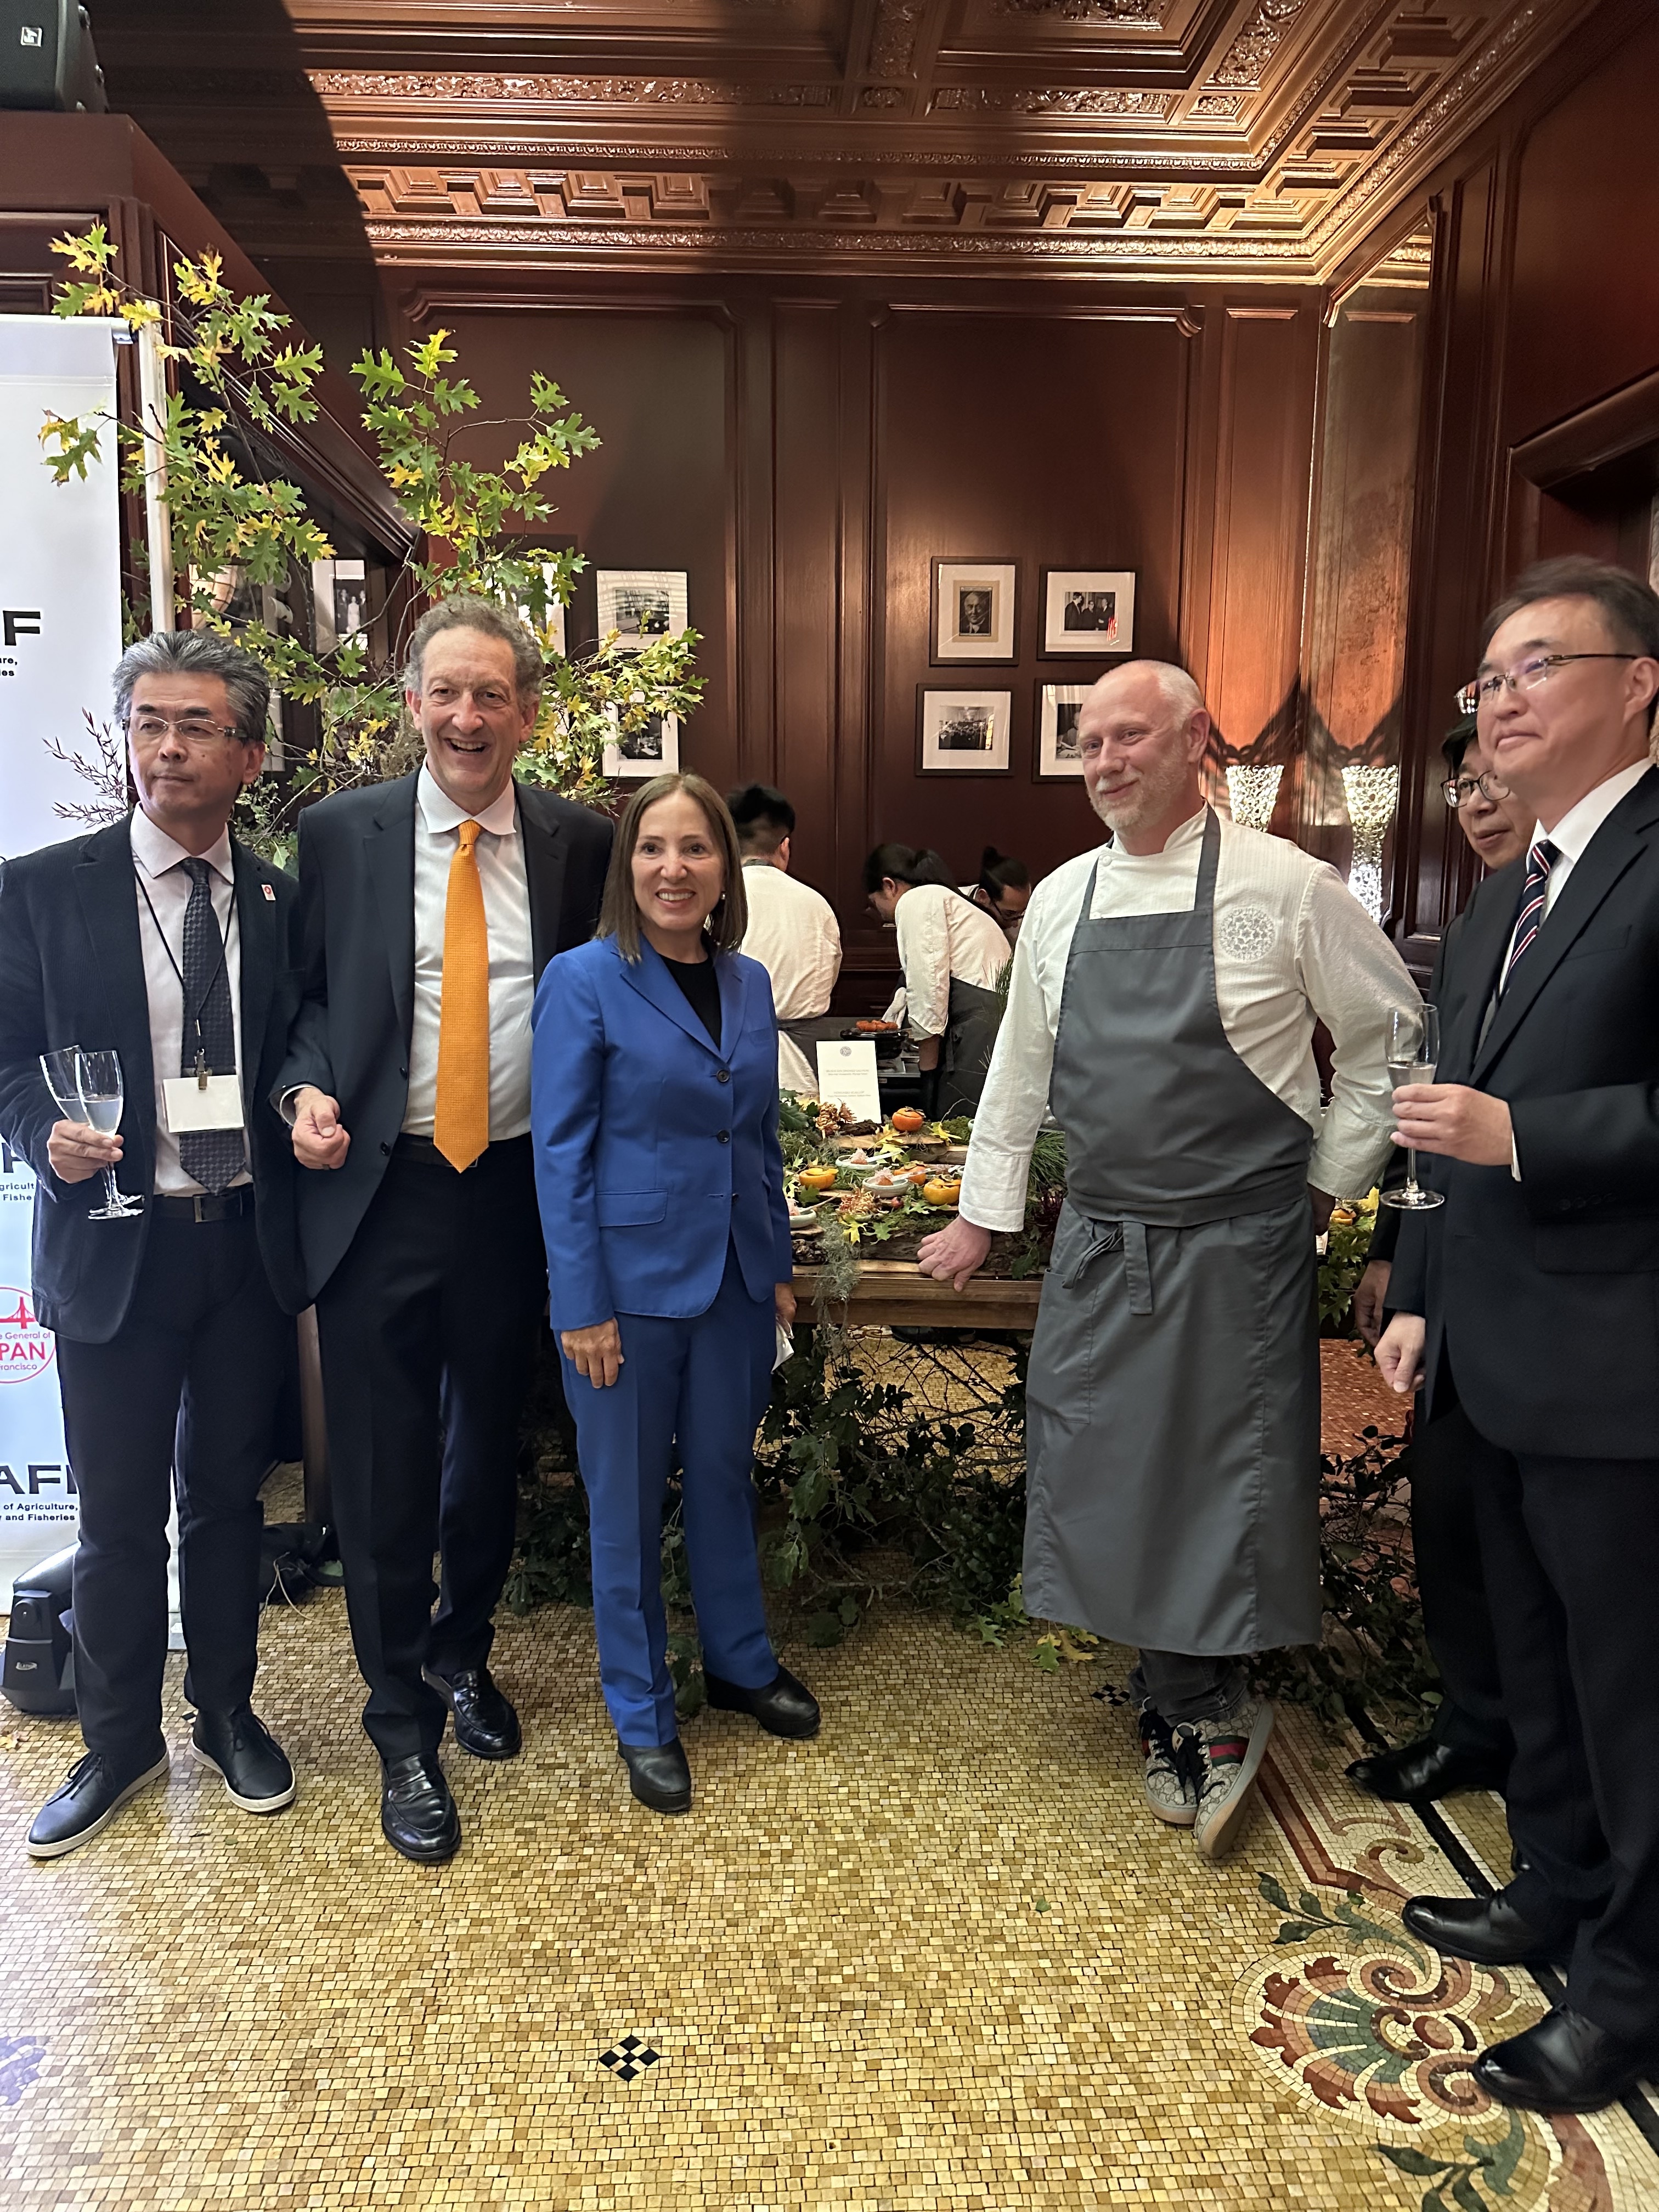 Image of Lt. Governor Kounalakis standing with a chef and other dignitaries at a reception. 